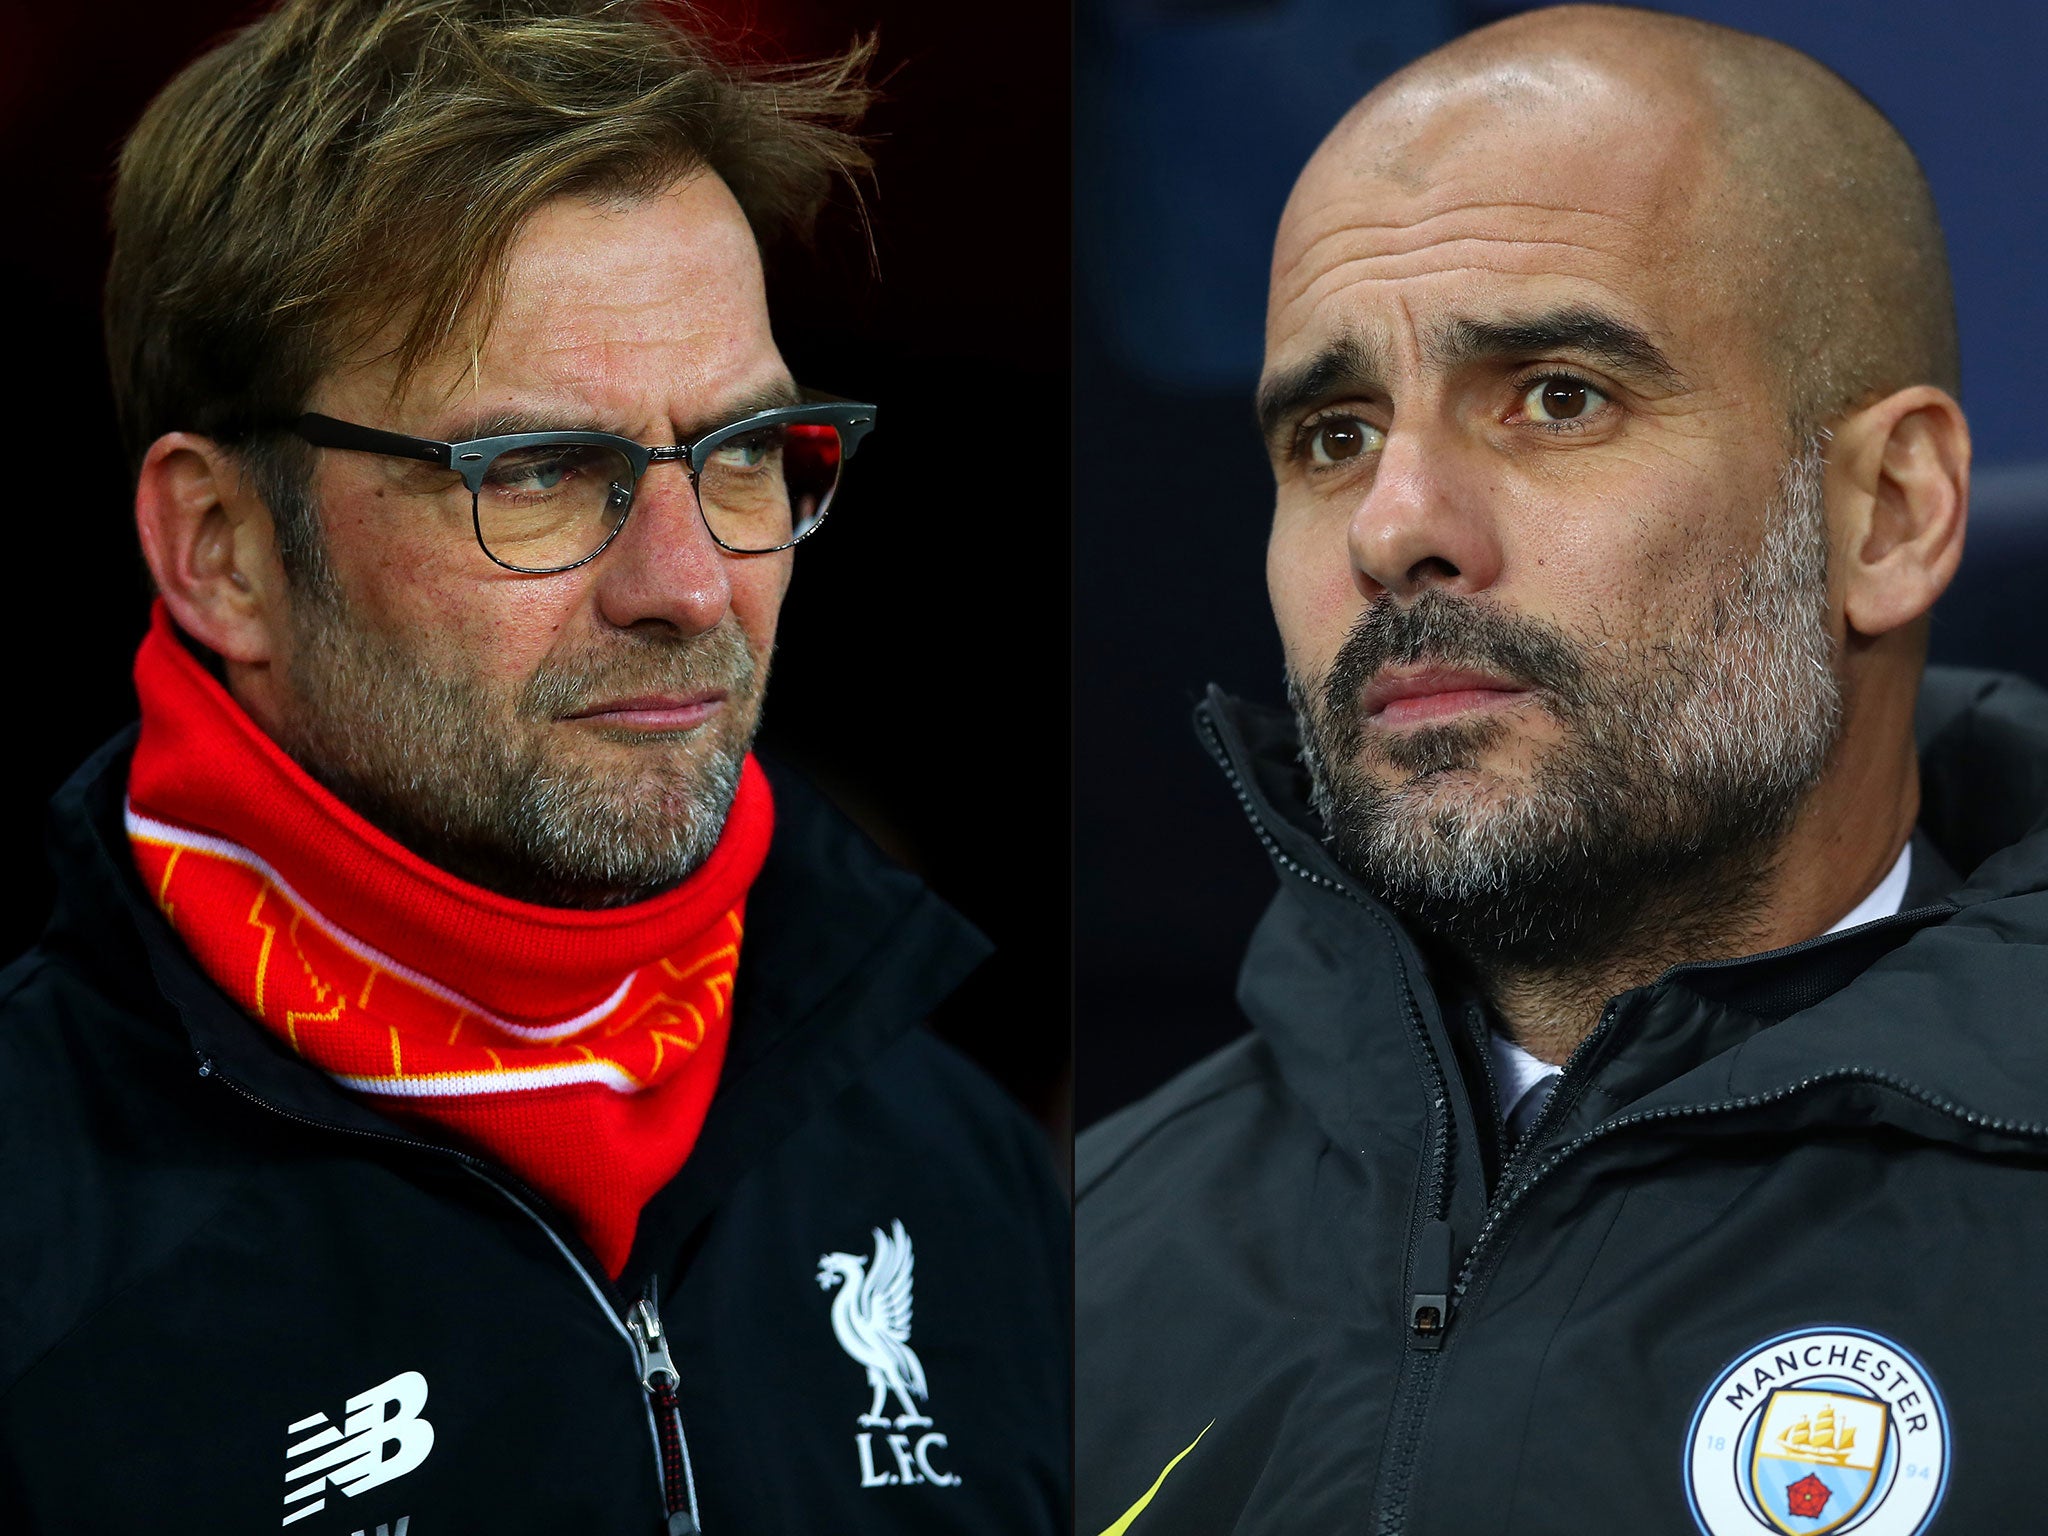 Jurgen Klopp and Pep Guardiola meet once again for the first time since the German left Borussia Dortmund